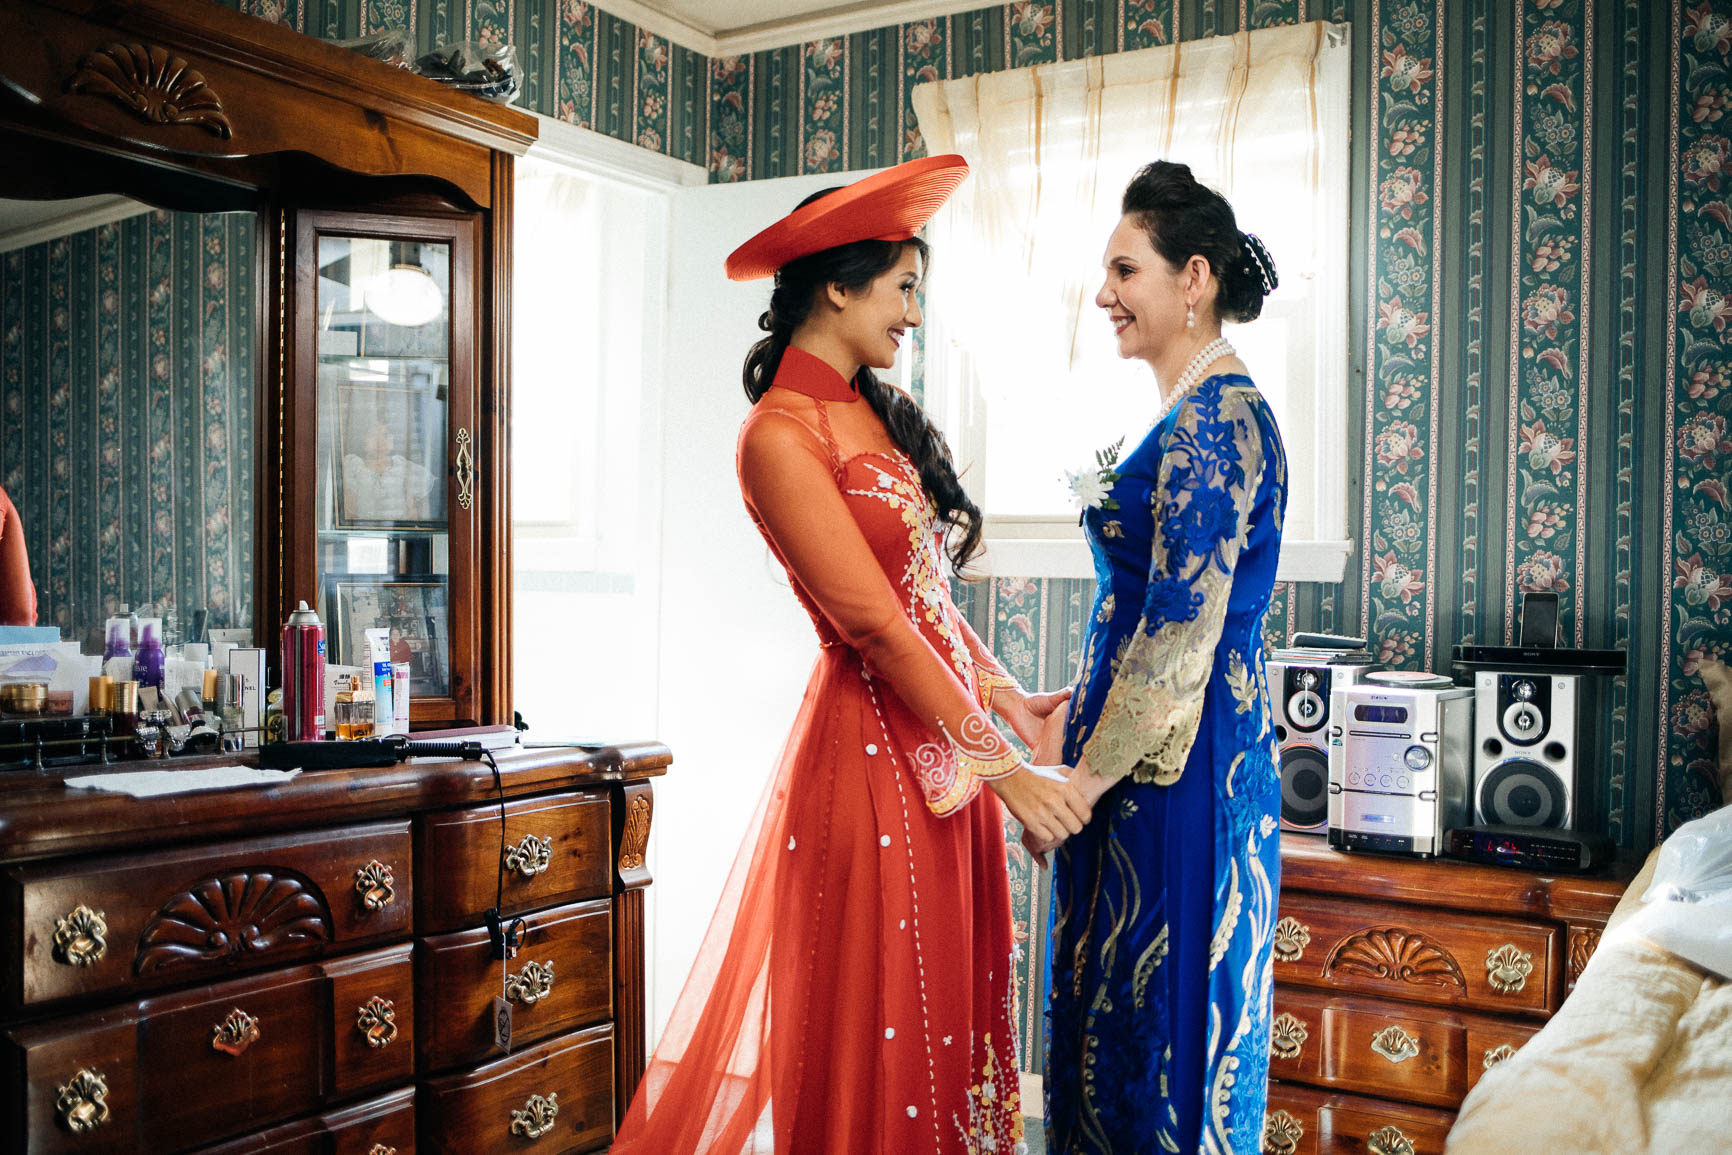 vietnamese weddings in charlotte nc, chinese weddings in charlotte nc, cultural wedding photographer, charlotte wedding photographer, cultural wedding ceremony, nhieu tang photography, greenville wedding photographer